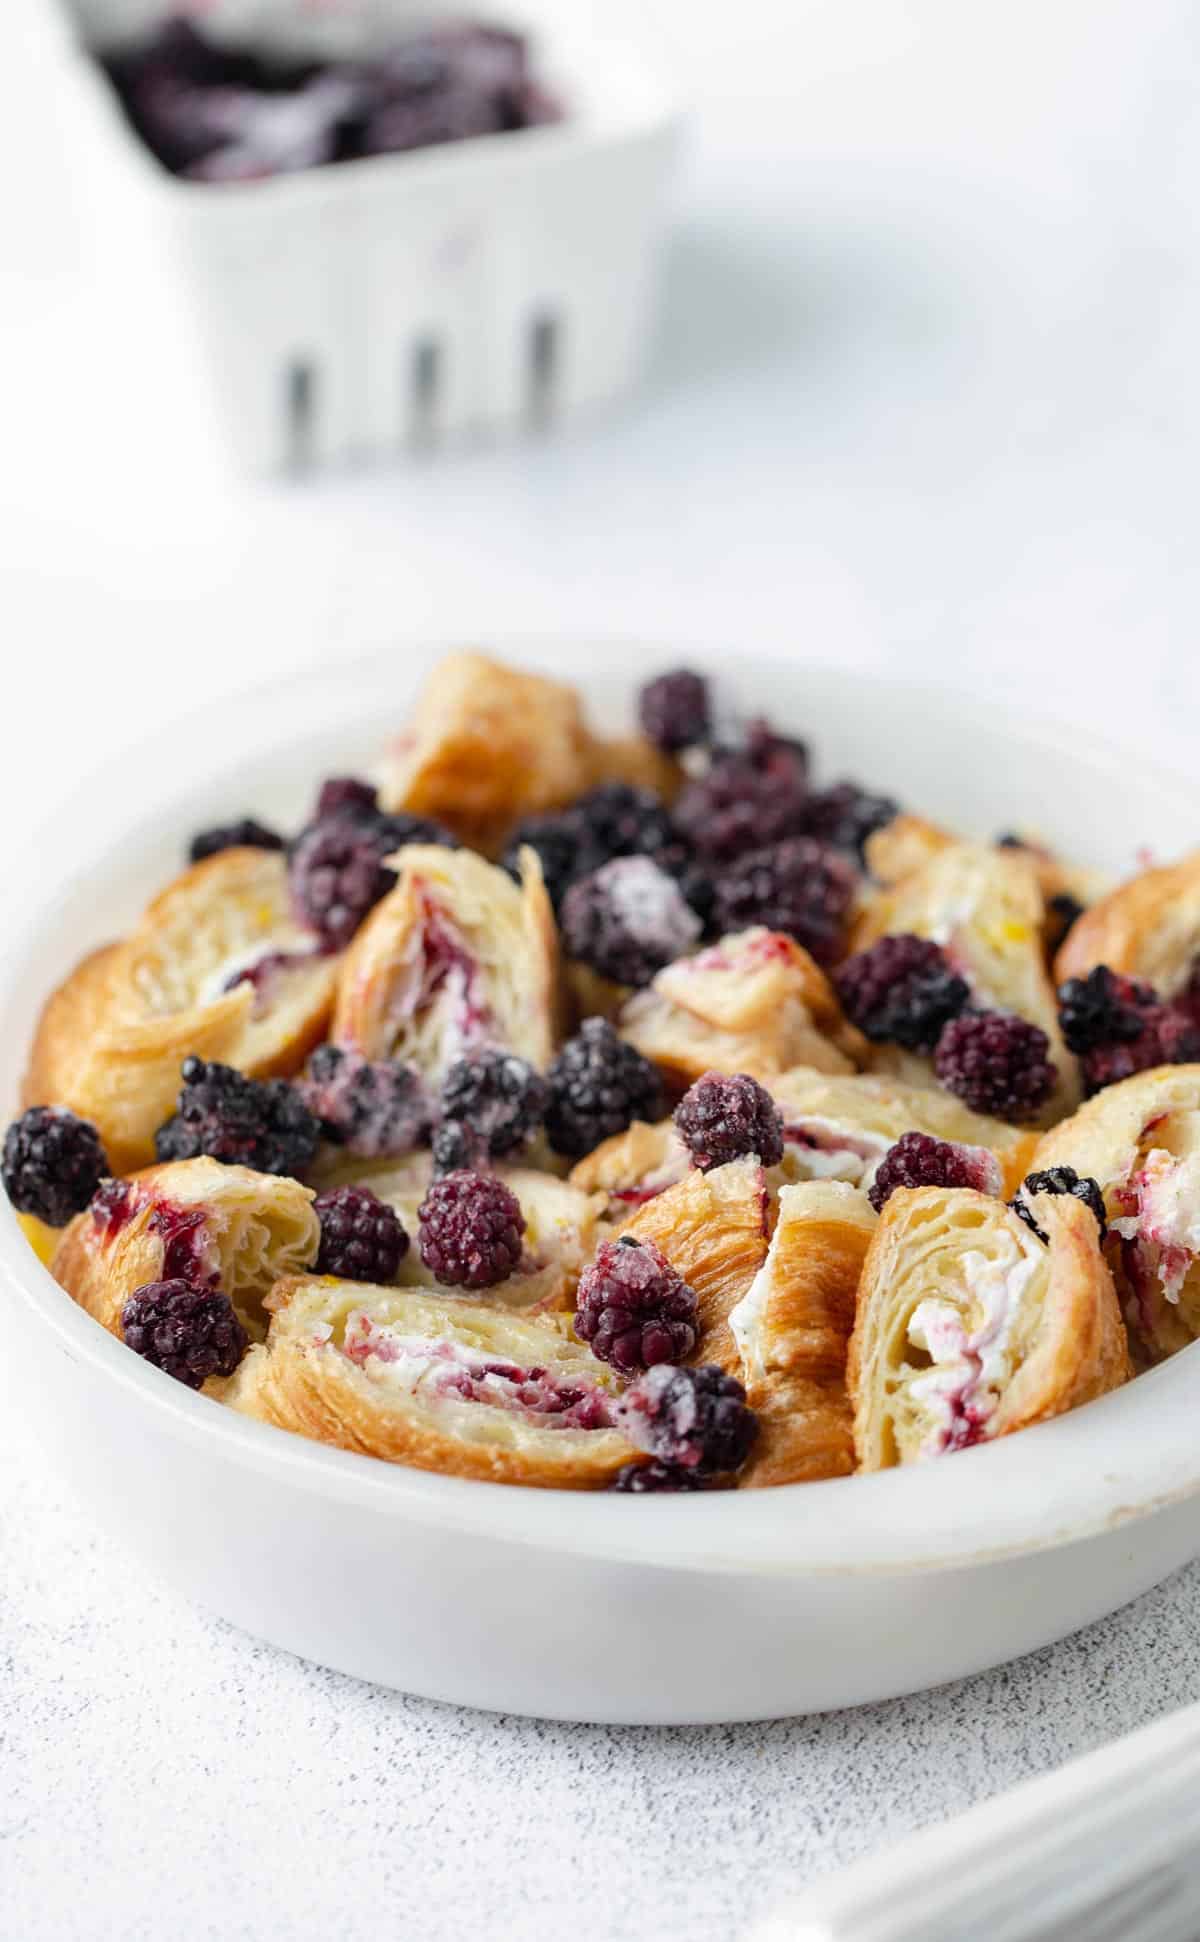 Blackberries and Cream Croissant French Toast Bake is an easy make ahead breakfast recipe with crispy croissants and the sweet flavors of berries and cream.  overnight French toast casserole recipe | Blackberry recipes | Brunch recipes | easy cream cheese stuffed French toast | make ahead breakfast 